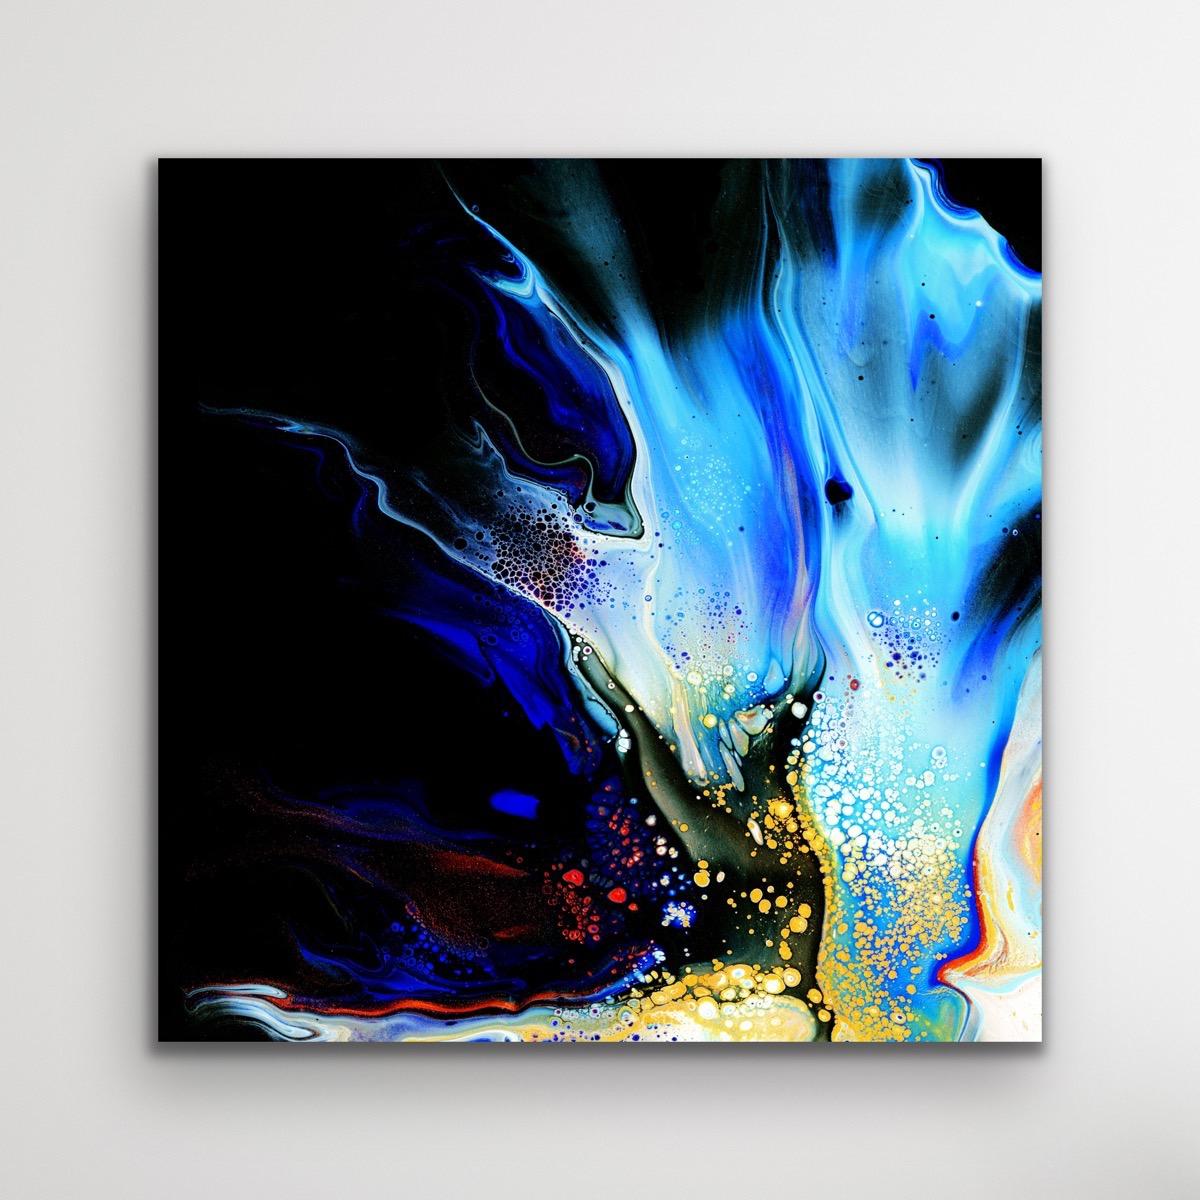 Modern Giclee Print, Black Contemporary Fluid Painting, Signed Limited Edition 